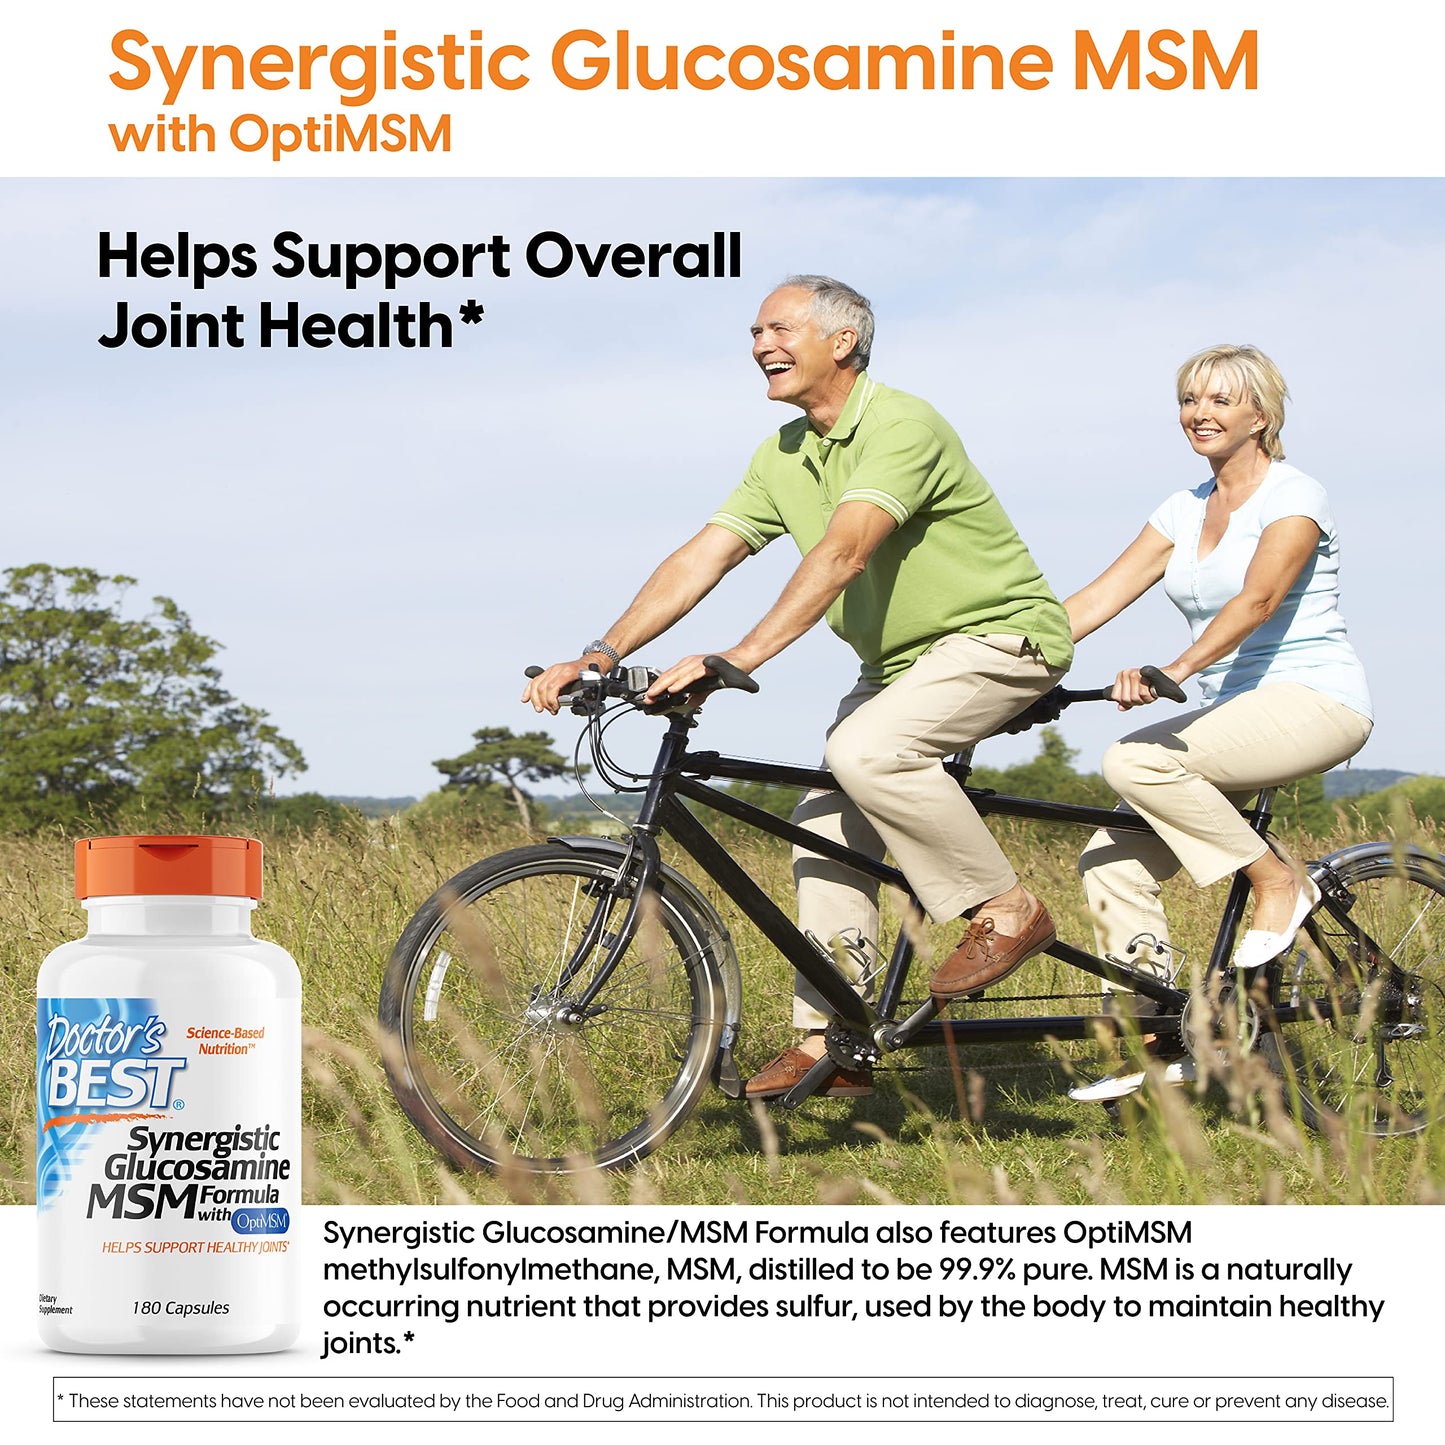 Doctor's Best Synergistic Glucosamine MSM with OptiMSM, Non-GMO, Gluten Free, Soy Free, Joint Support, 180 Caps